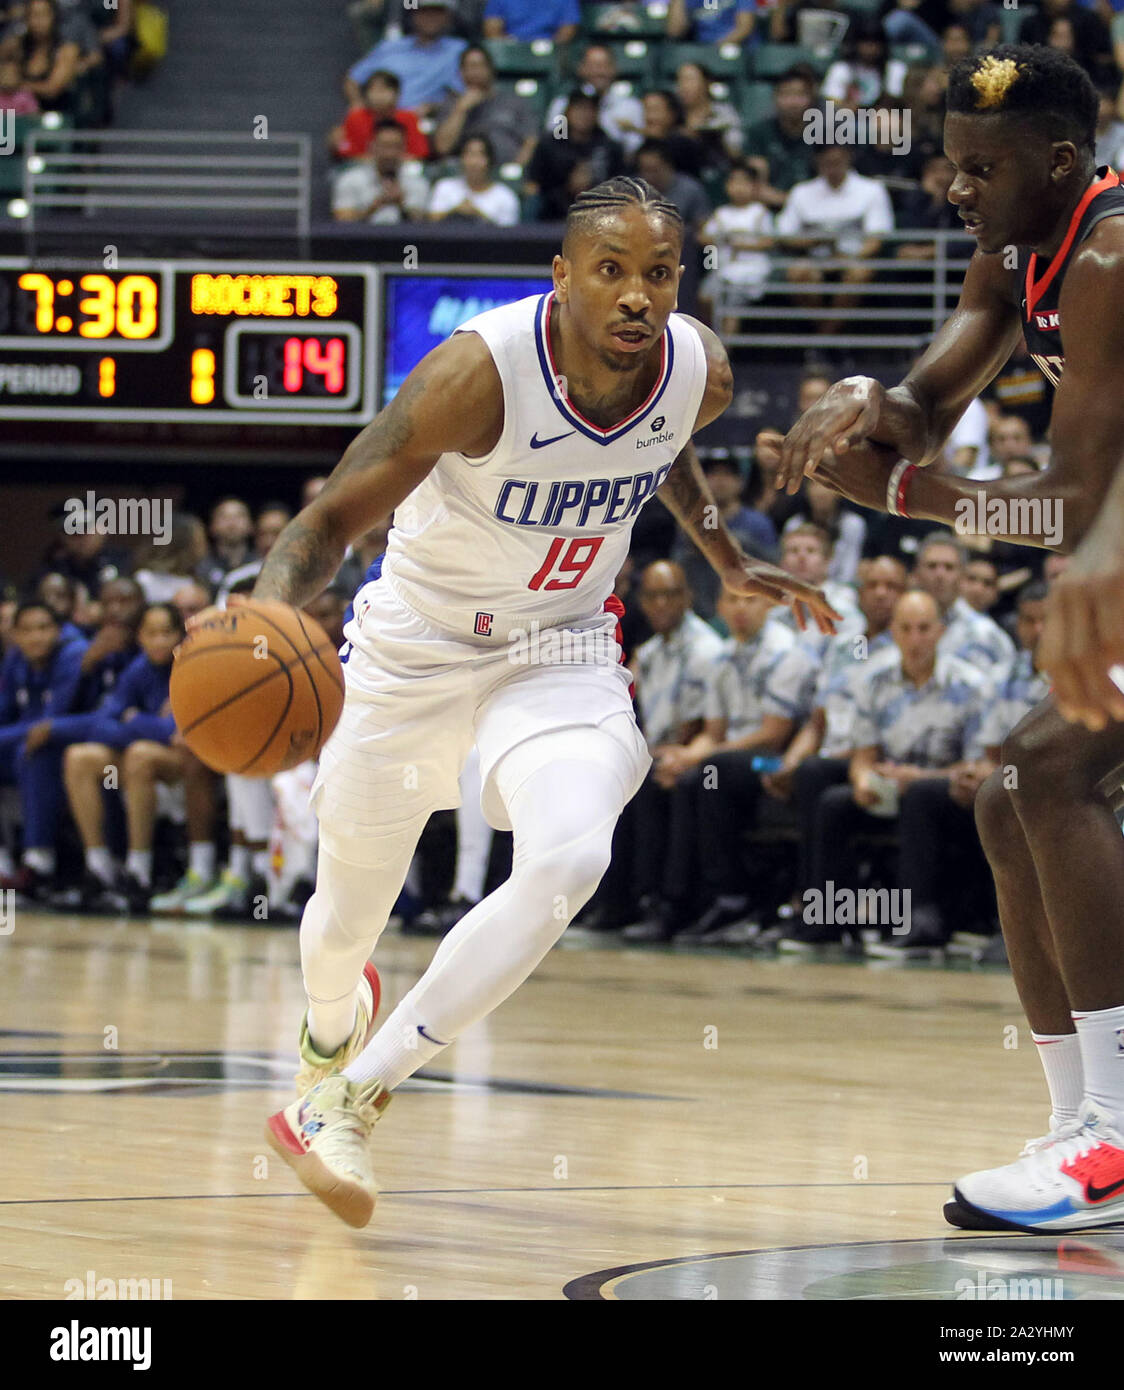 October 3 2019 Los Angeles Clippers Guard Rodney Mcgruder 19 Dribbles The Ball During A Preseason Game Between The Los Angeles Clippers And The Houston Rockets At The Stan Sheriff Center